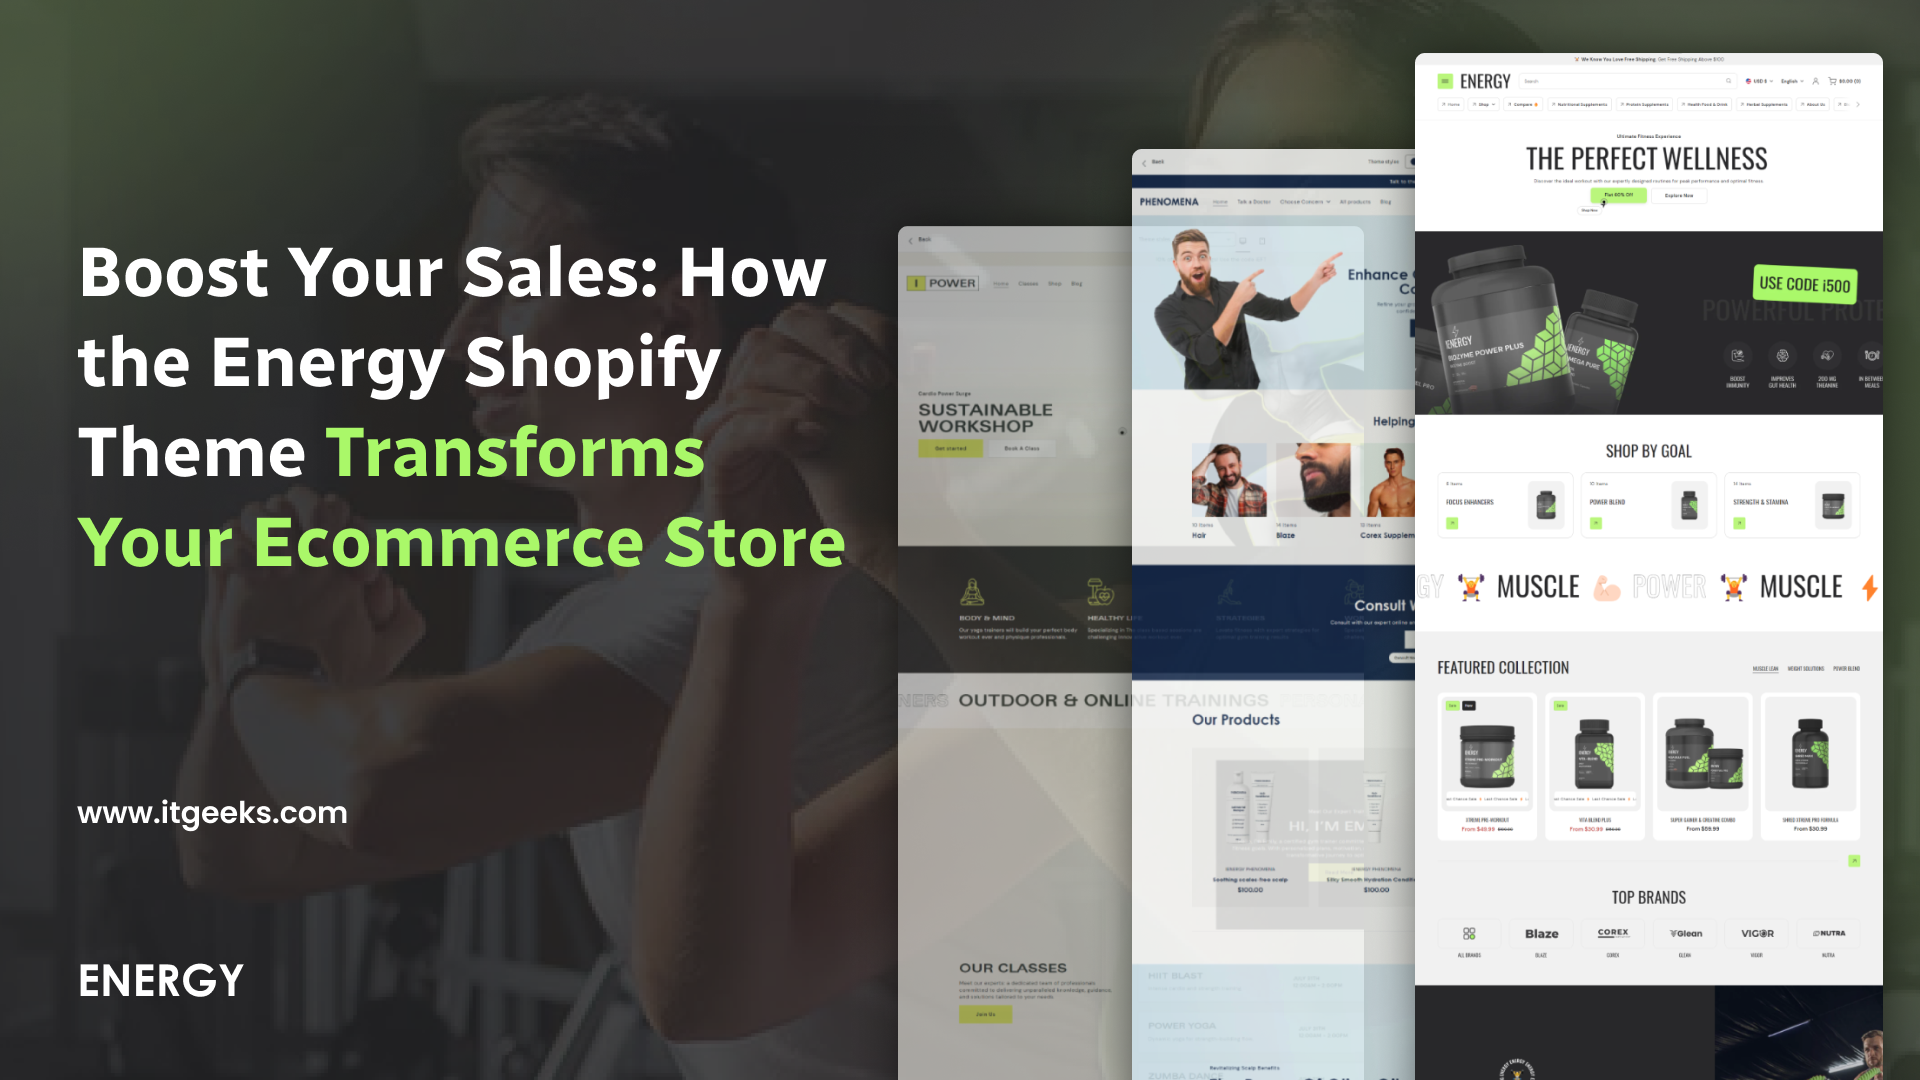 Boost Your Sales: How the Energy Shopify Theme Transforms Your Ecommerce Store